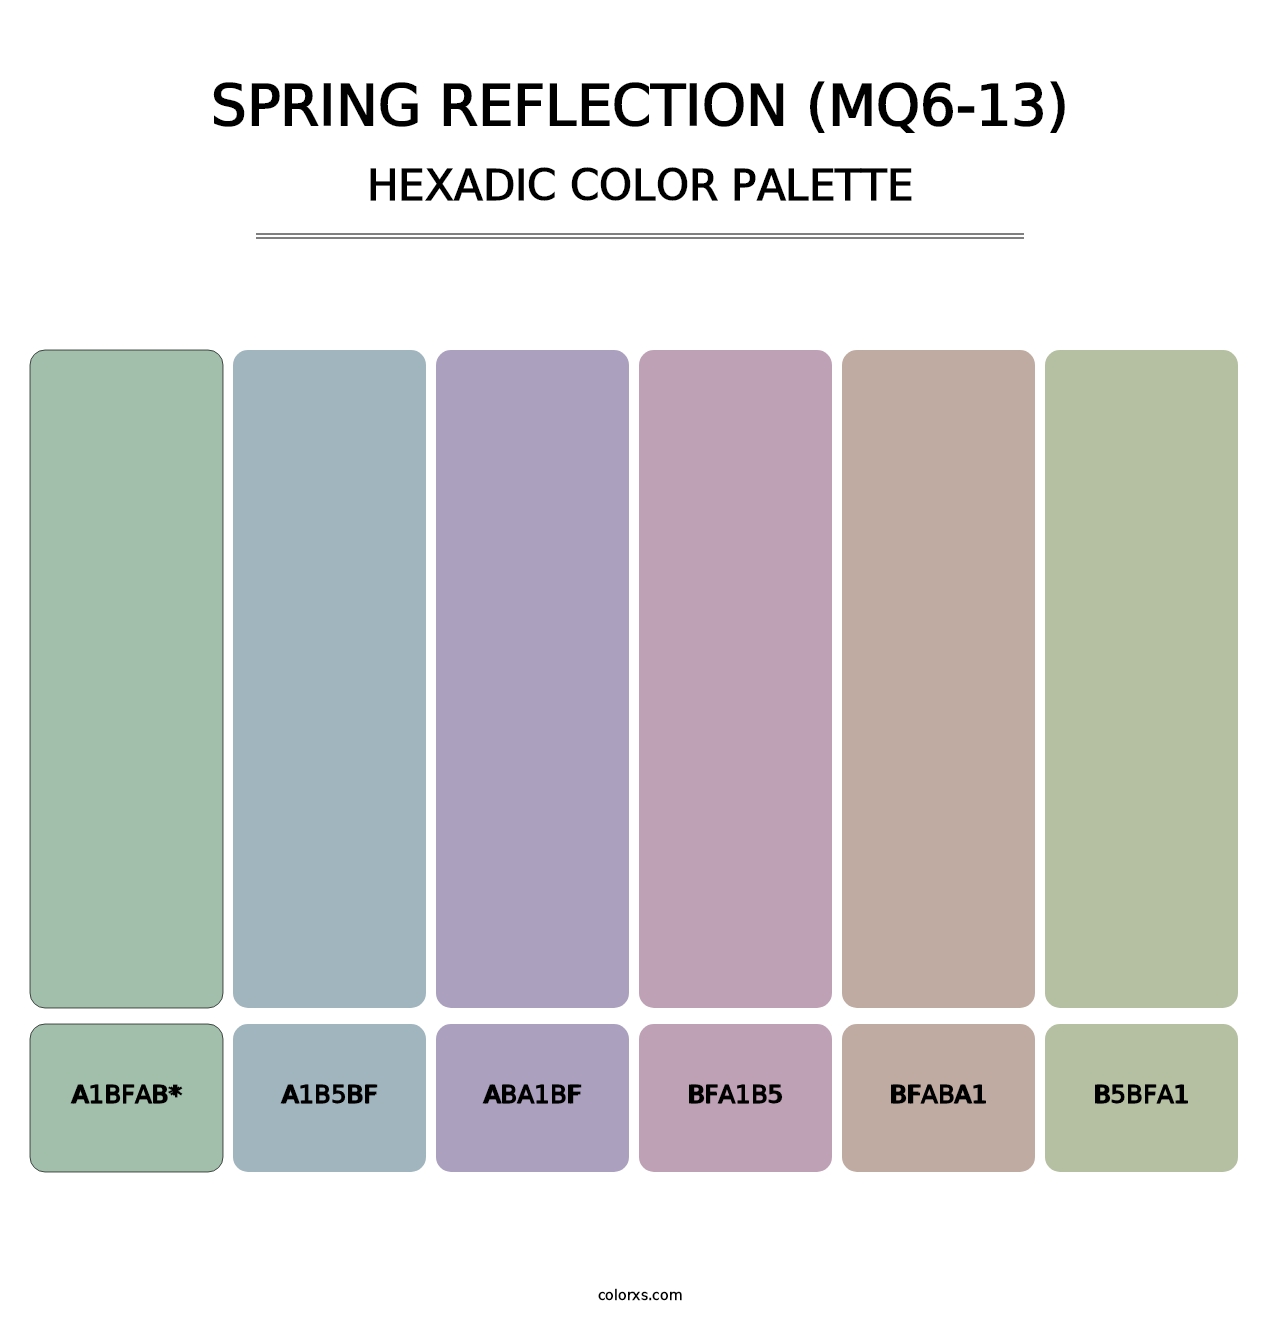 Spring Reflection (MQ6-13) - Hexadic Color Palette